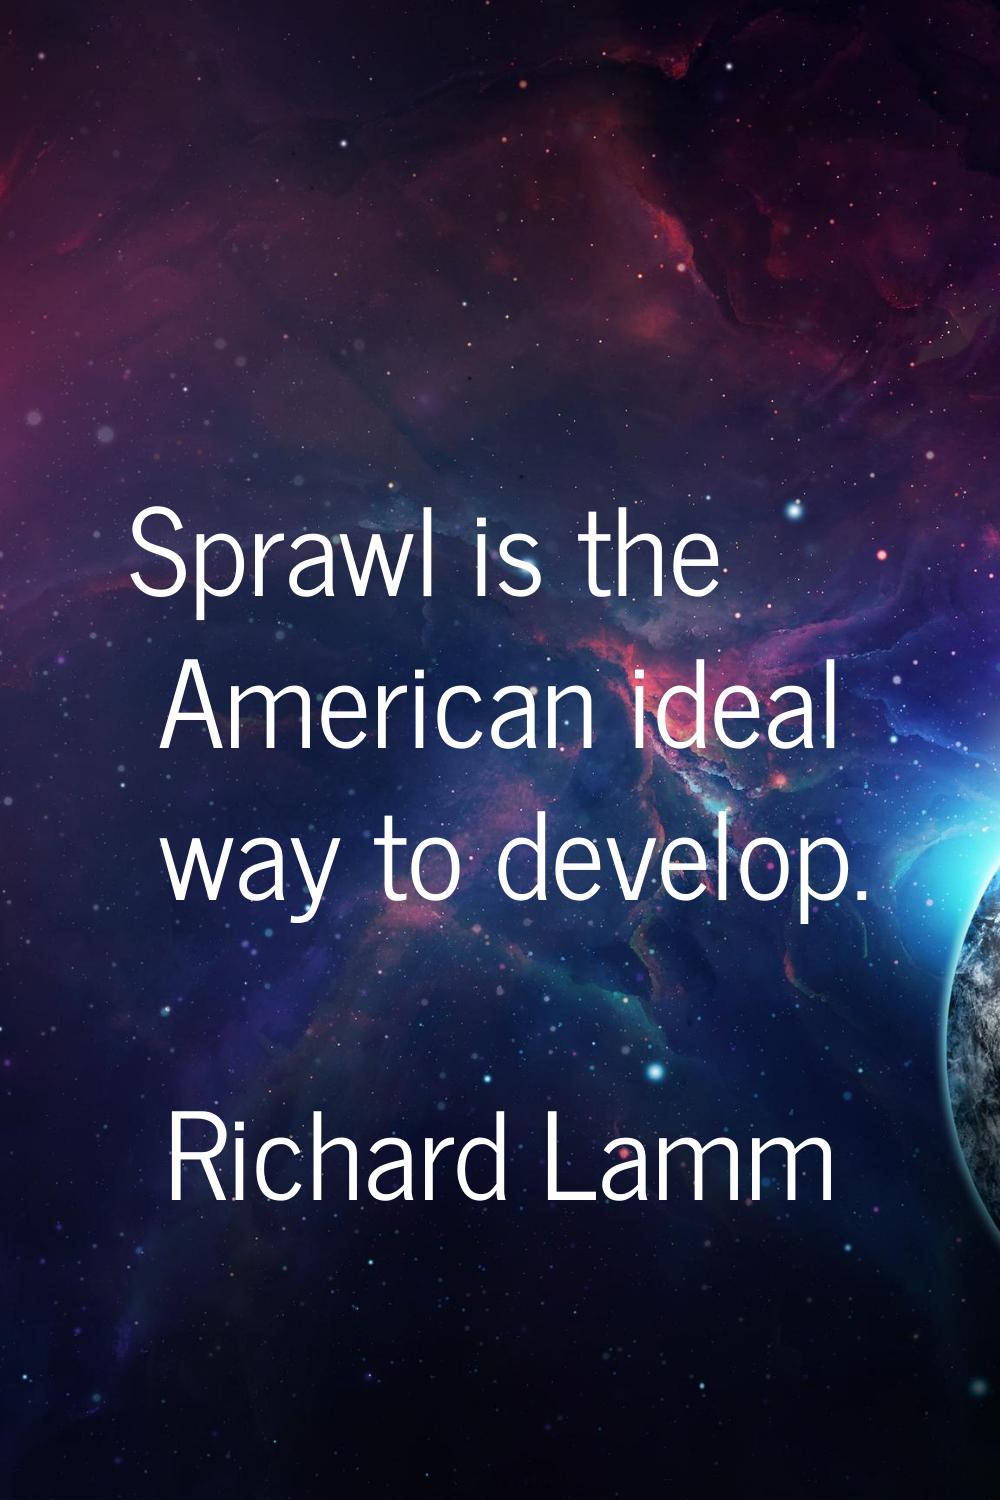 Sprawl is the American ideal way to develop.